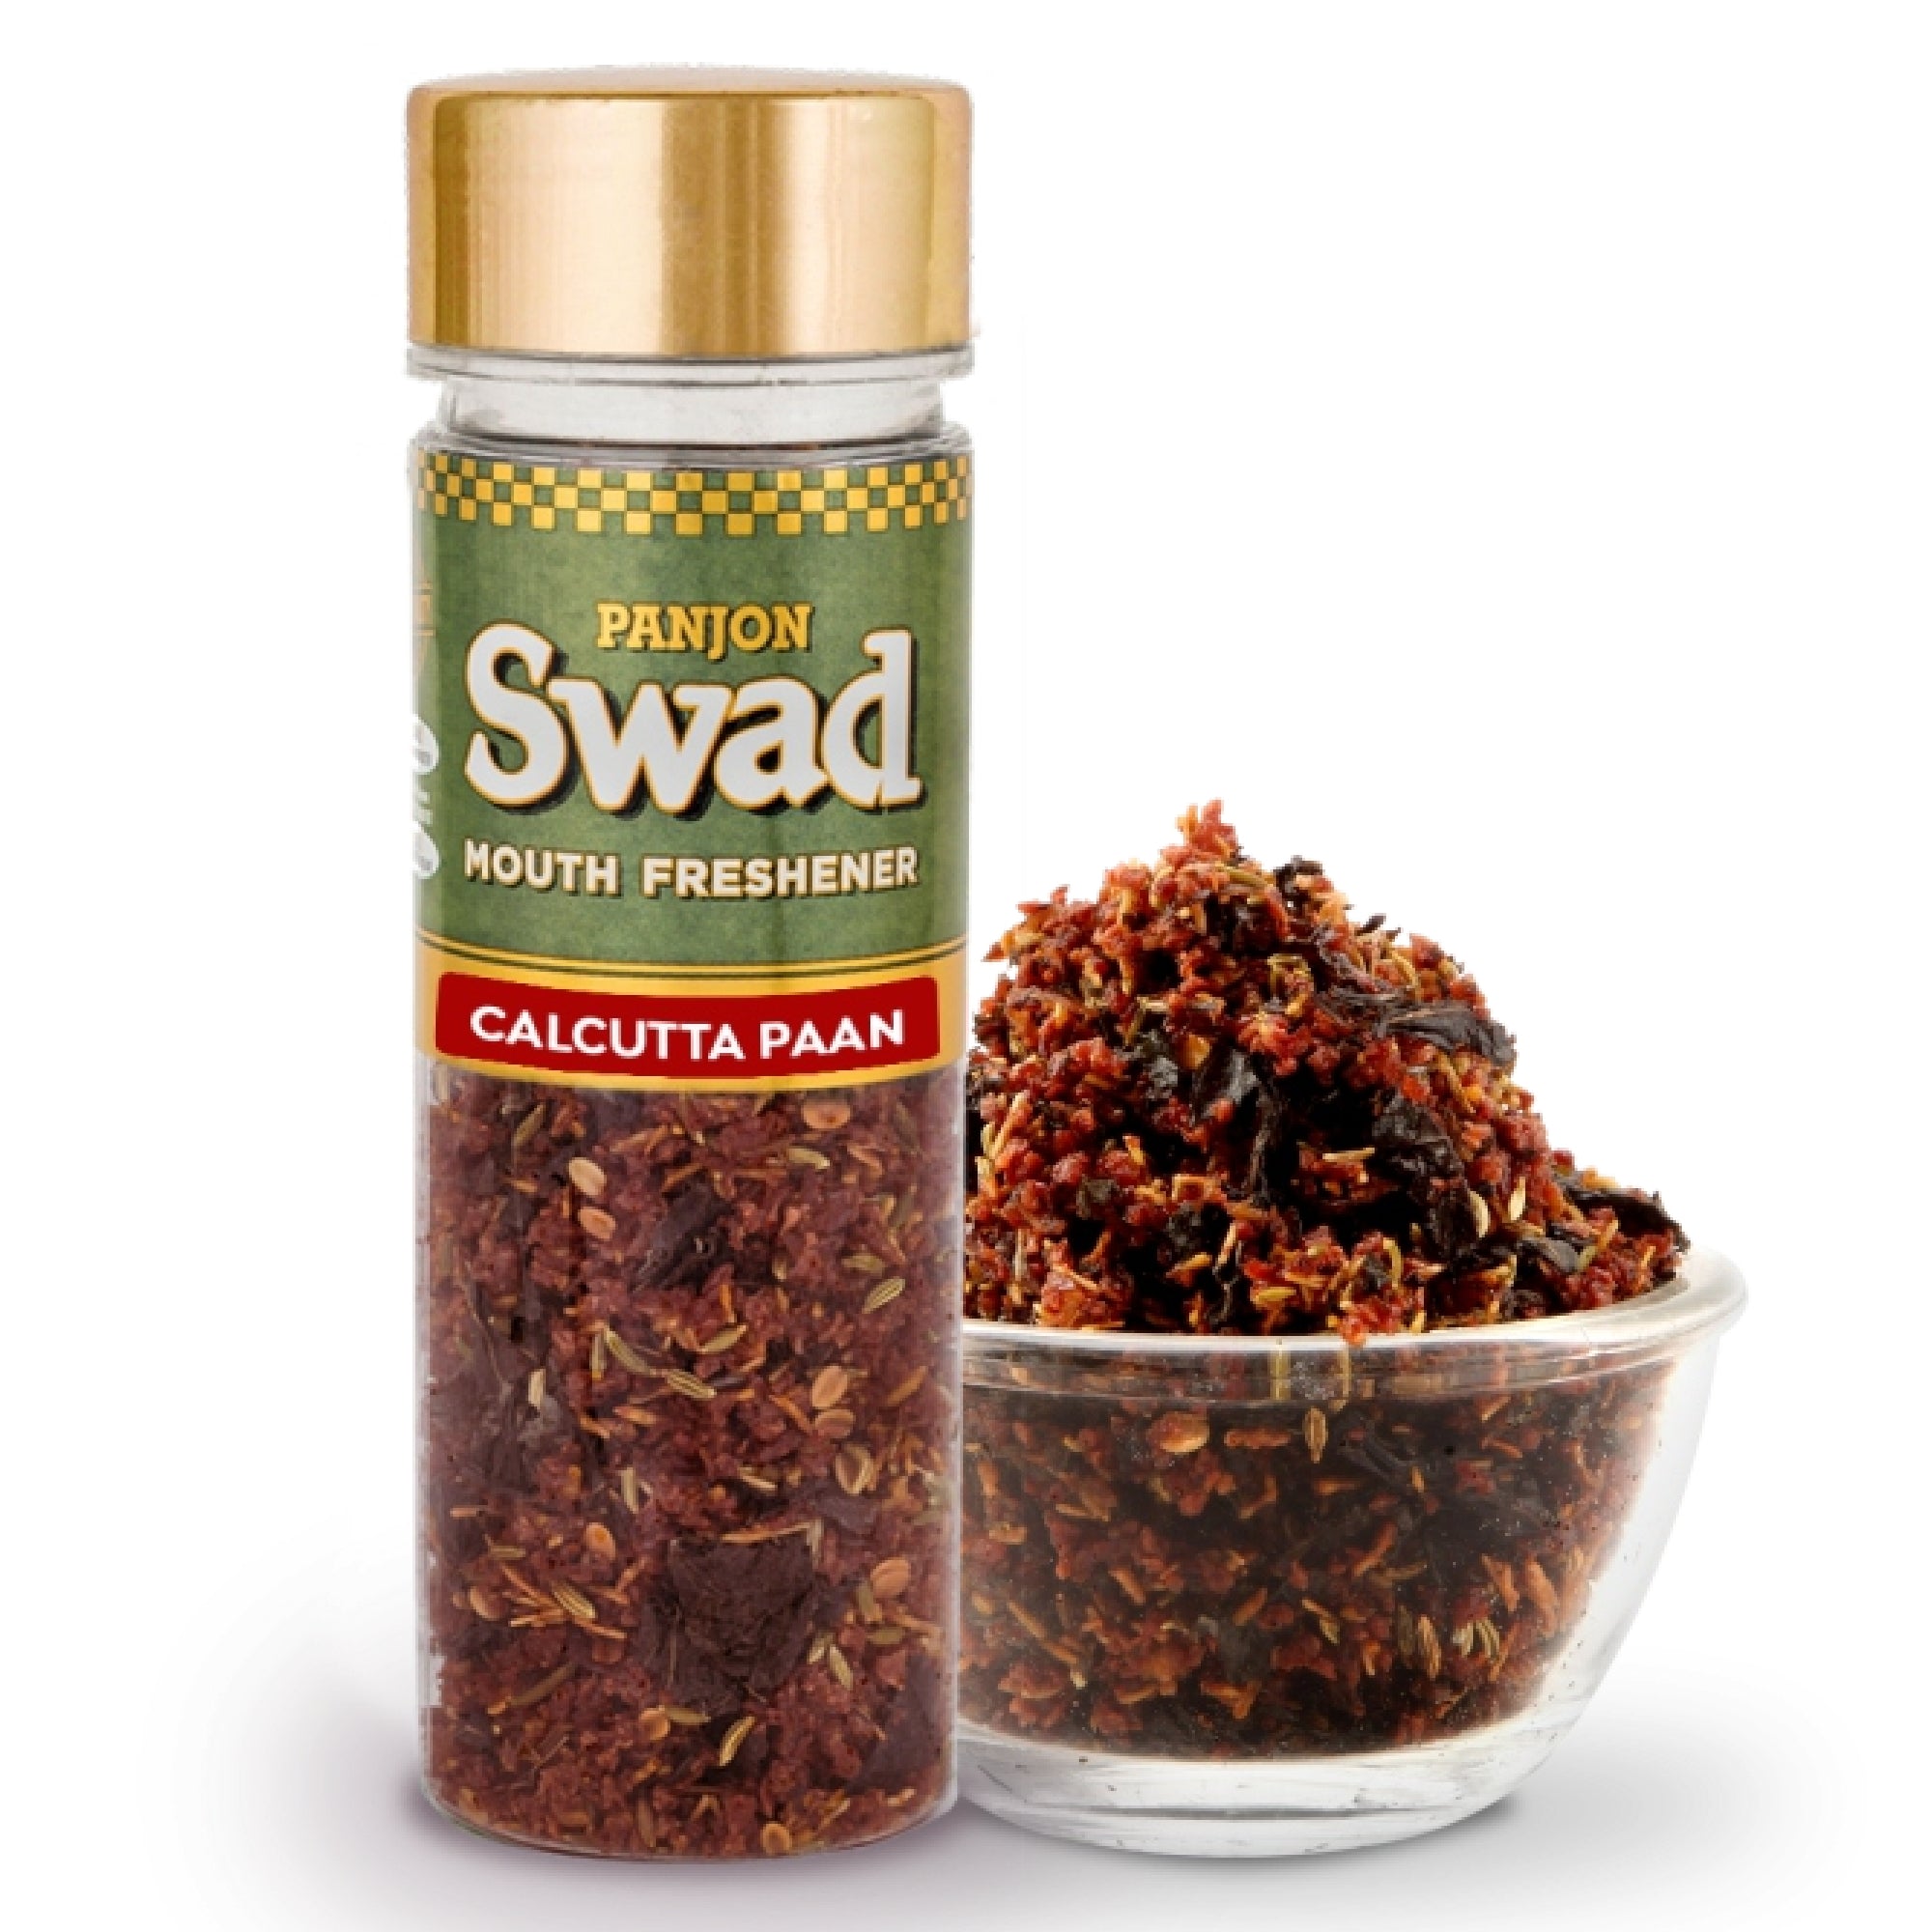 Swad Special Calcutta Paan Mukhwas Mouth Freshener Bottle, 100 g